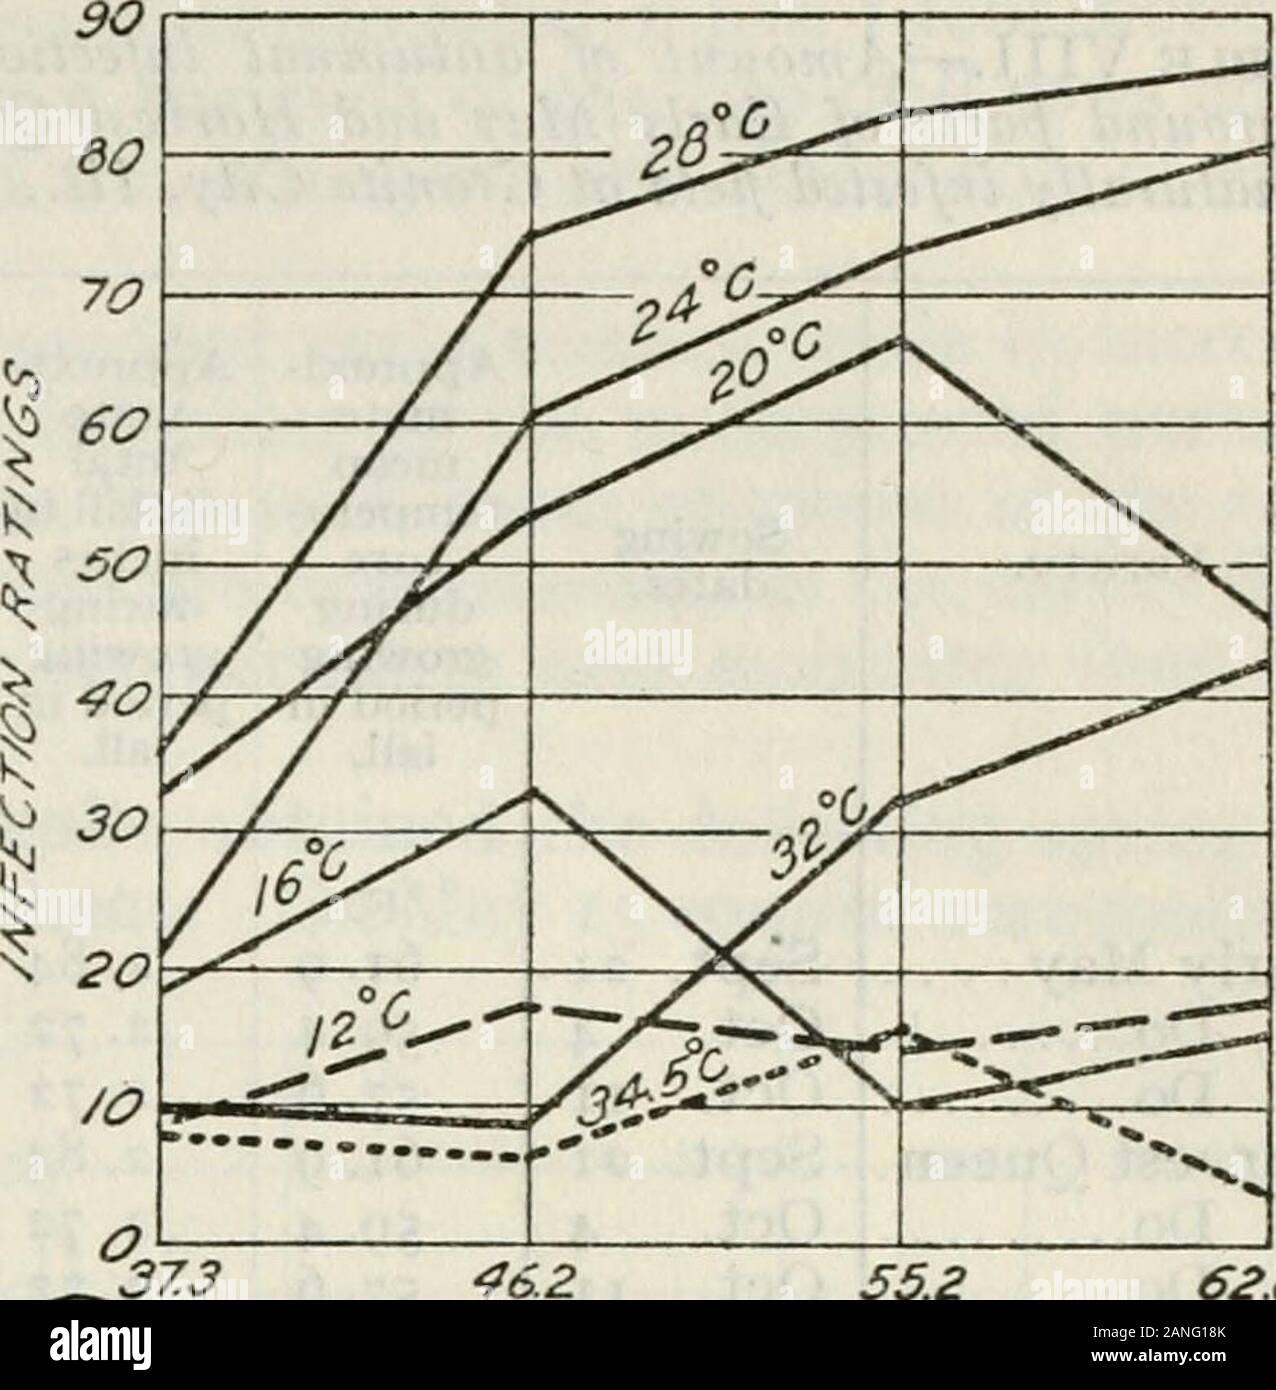 Journal of Agricultural Research . 333 44.^^ 55.5 66.6 CAP^c/ry OP so/L 77.7 Fig. 3.—Graph showing the amounts of Helminthosporium infectionon the subterranean parts of wheat seedlings grown at differentsoil moistures with other factors as uniform as possible, in experi-ments I and 2. Tabular results are given in Table VI. Nov. 3, 1923 Helminthosporium Disease of Wheat 211. Stock Photo